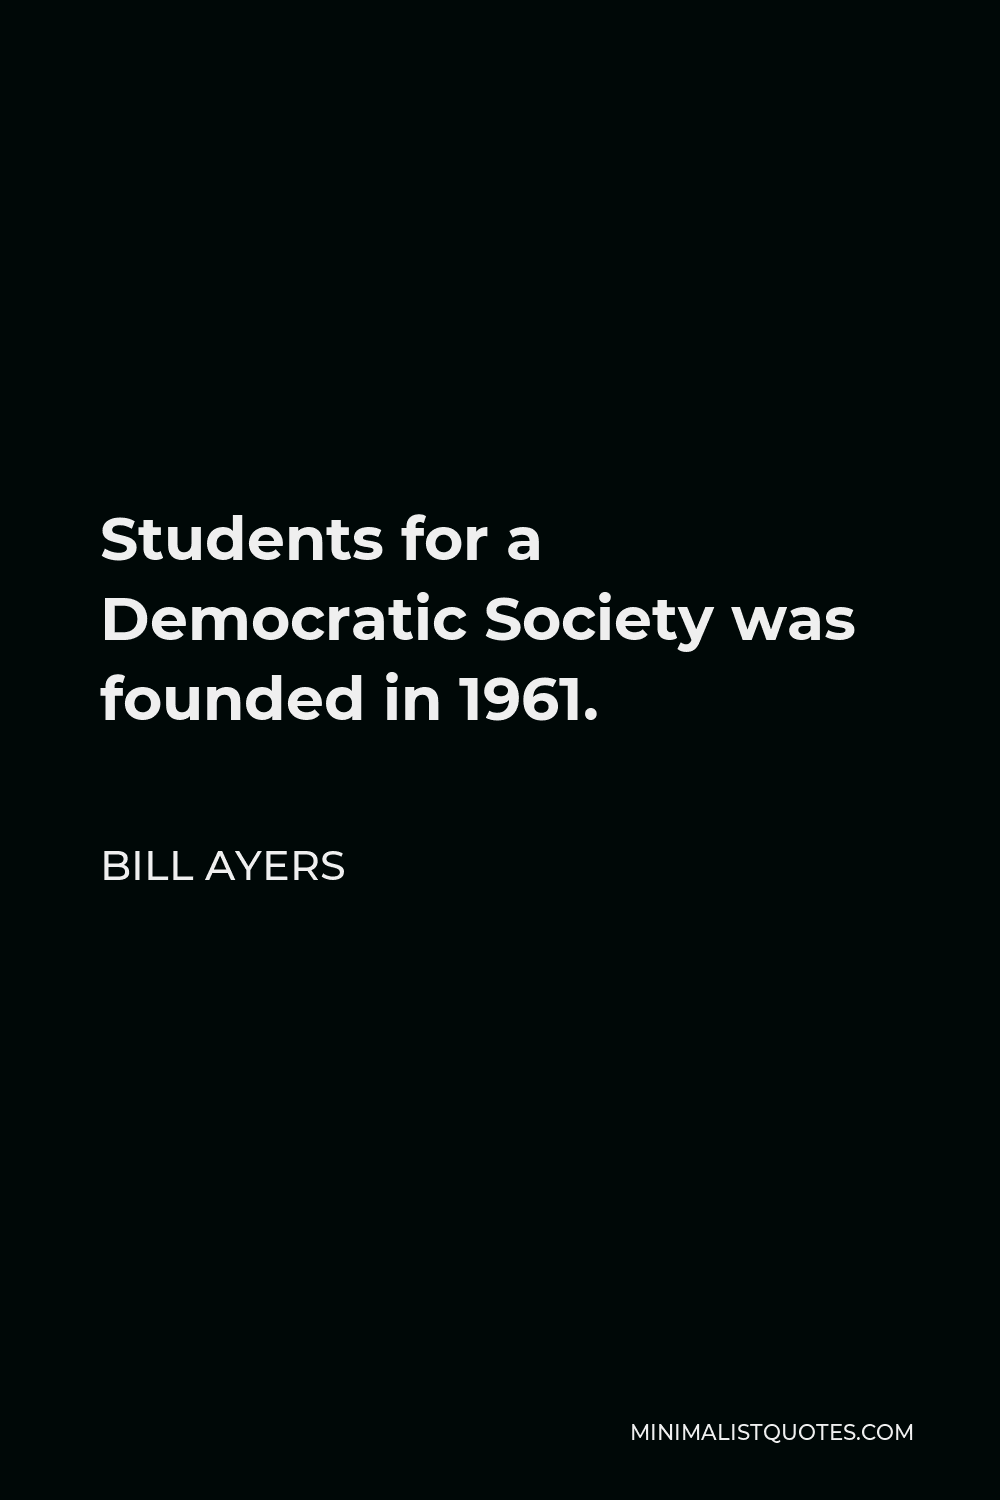 Bill Ayers Quote - Students for a Democratic Society was founded in 1961.